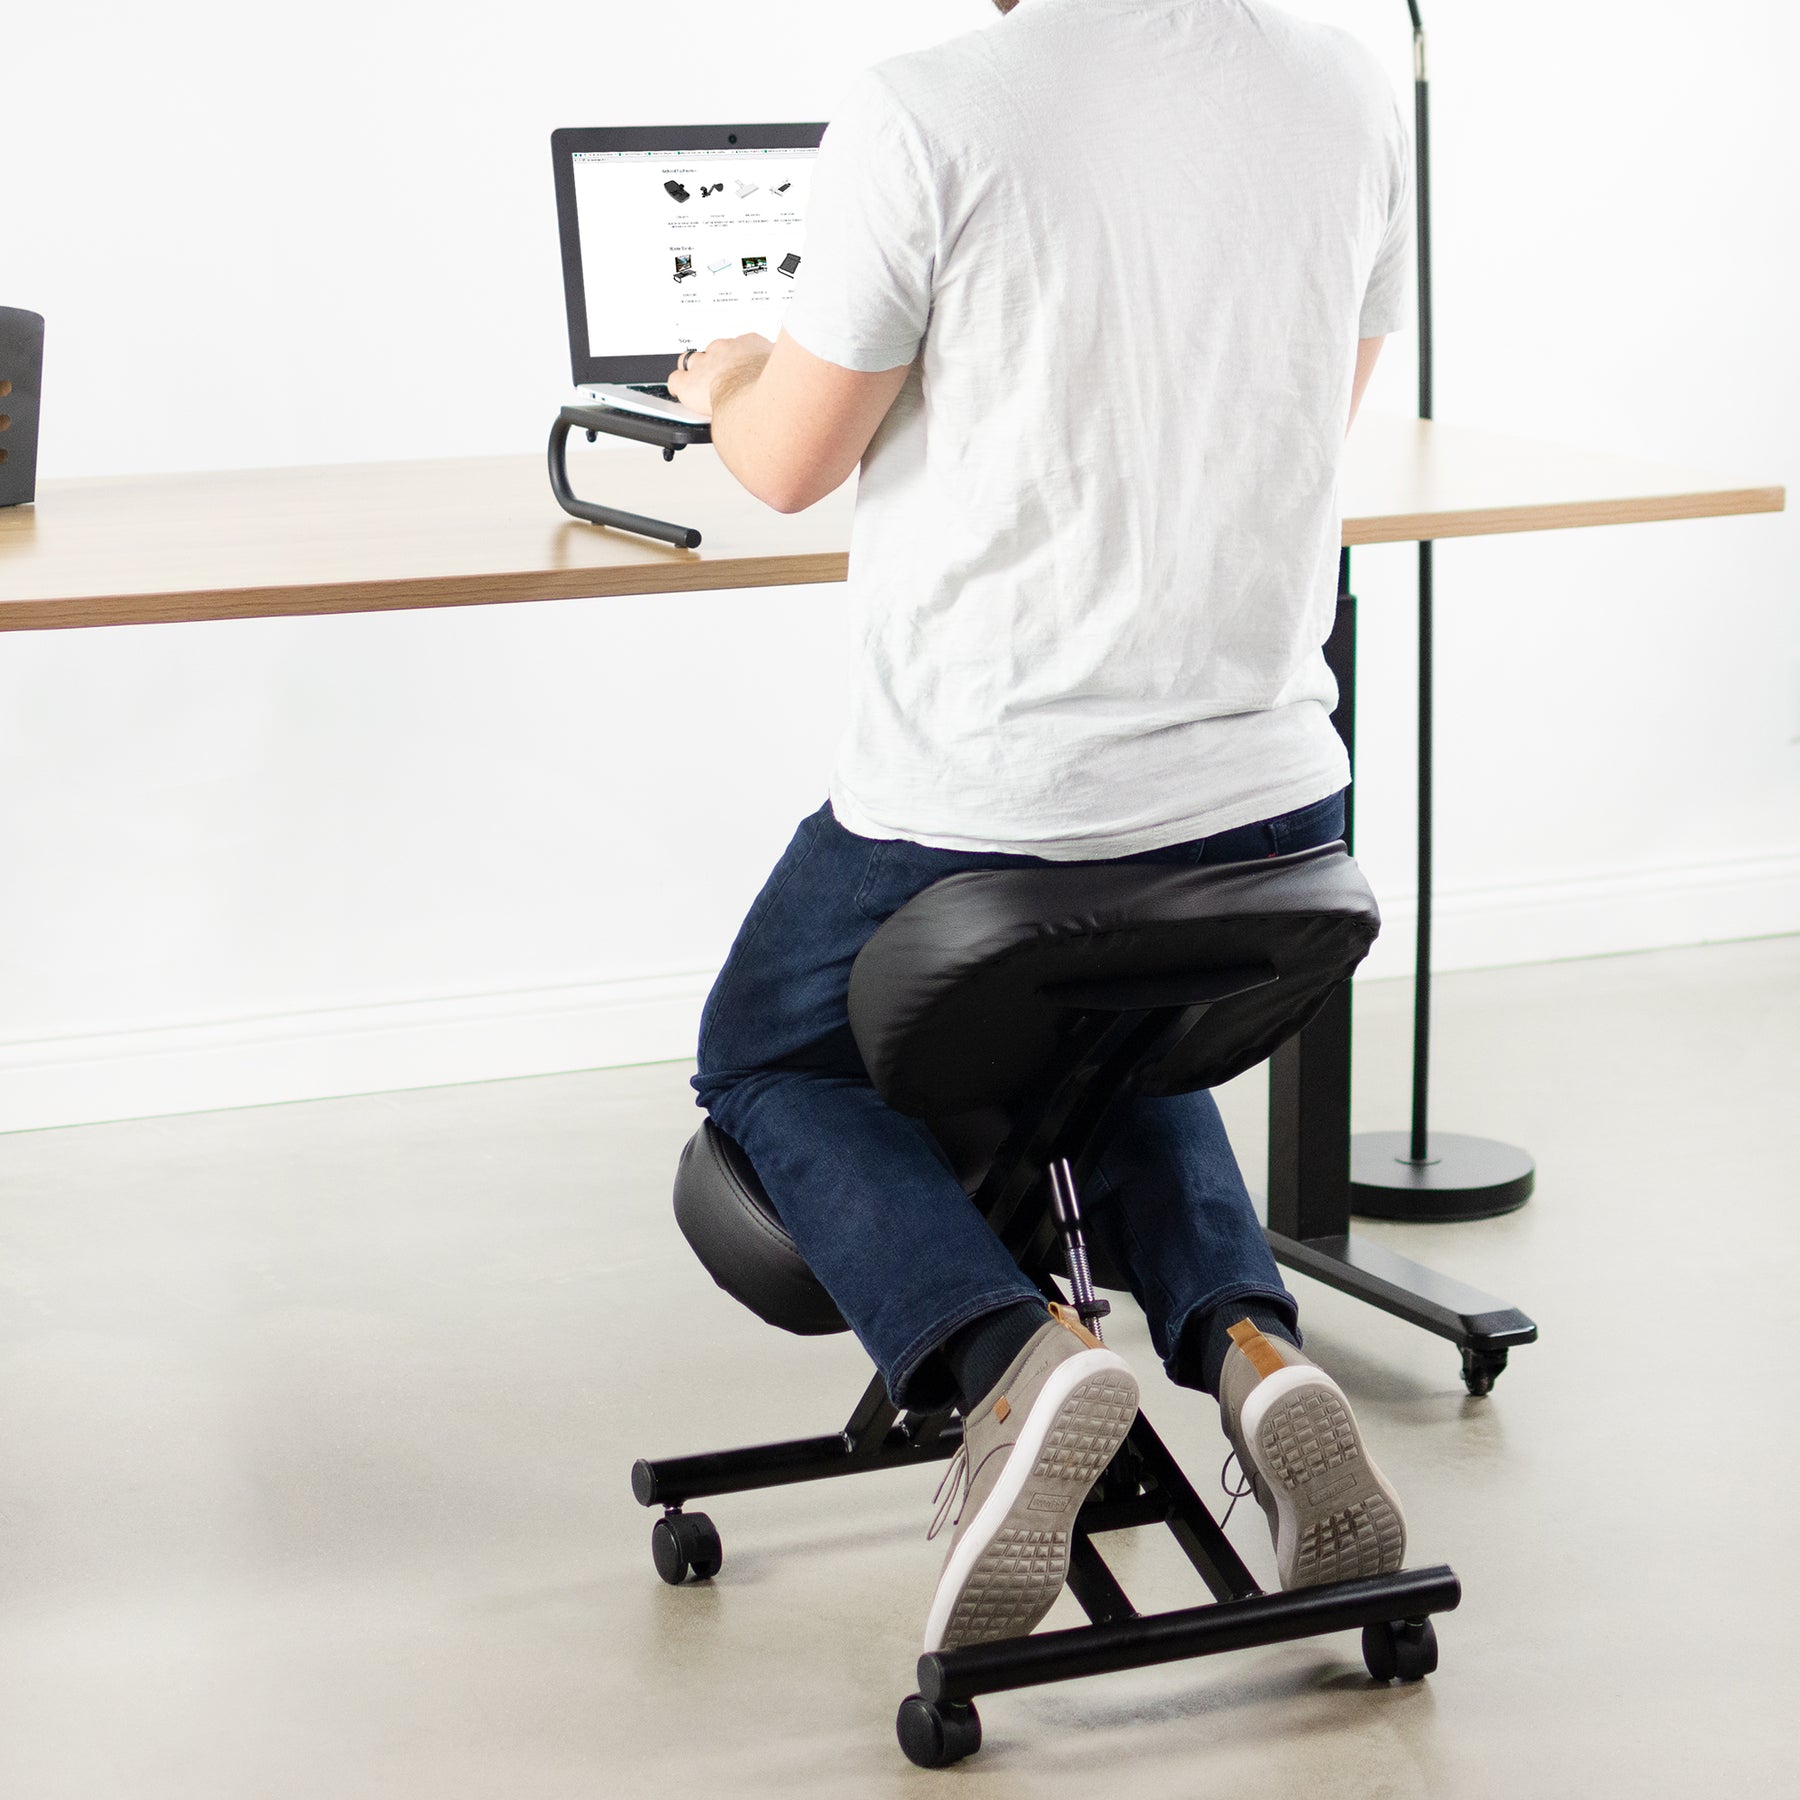 Adjustable Ergonomic Kneeling Chair with Back Support – VIVO - desk  solutions, screen mounting, and more